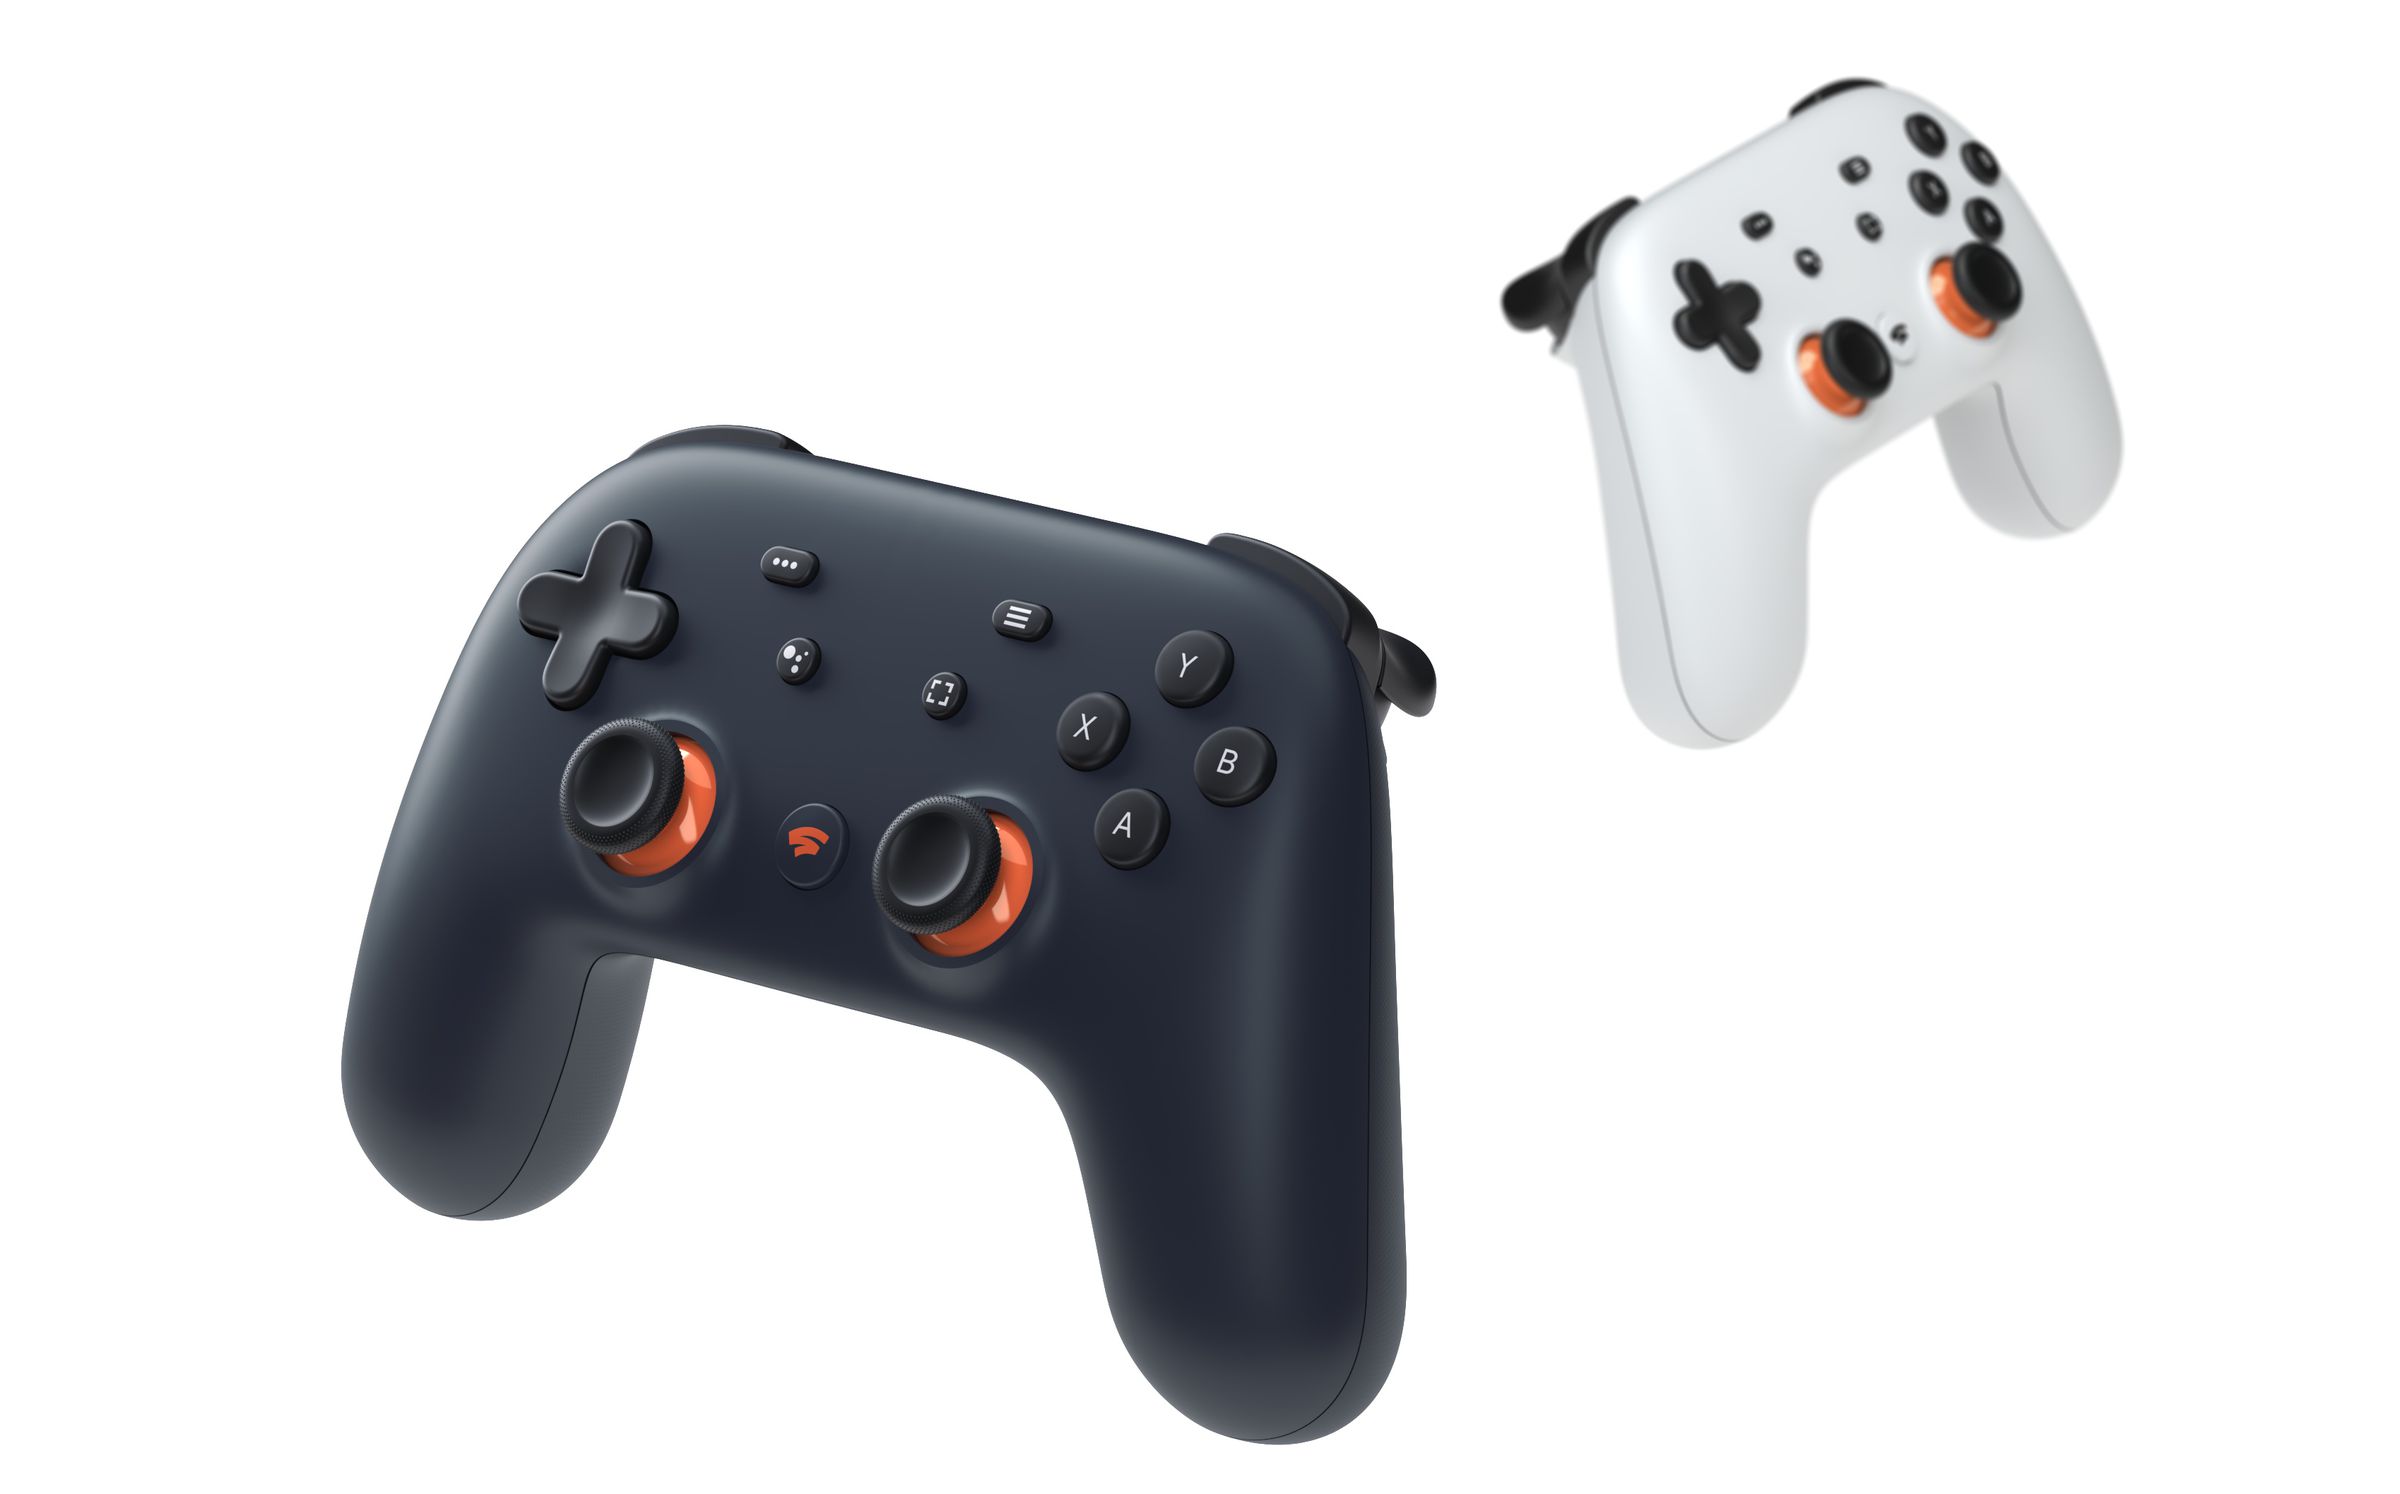 The limited-edition Stadia Founder’s Edition controller in Night Blue, compared to the regular white model.